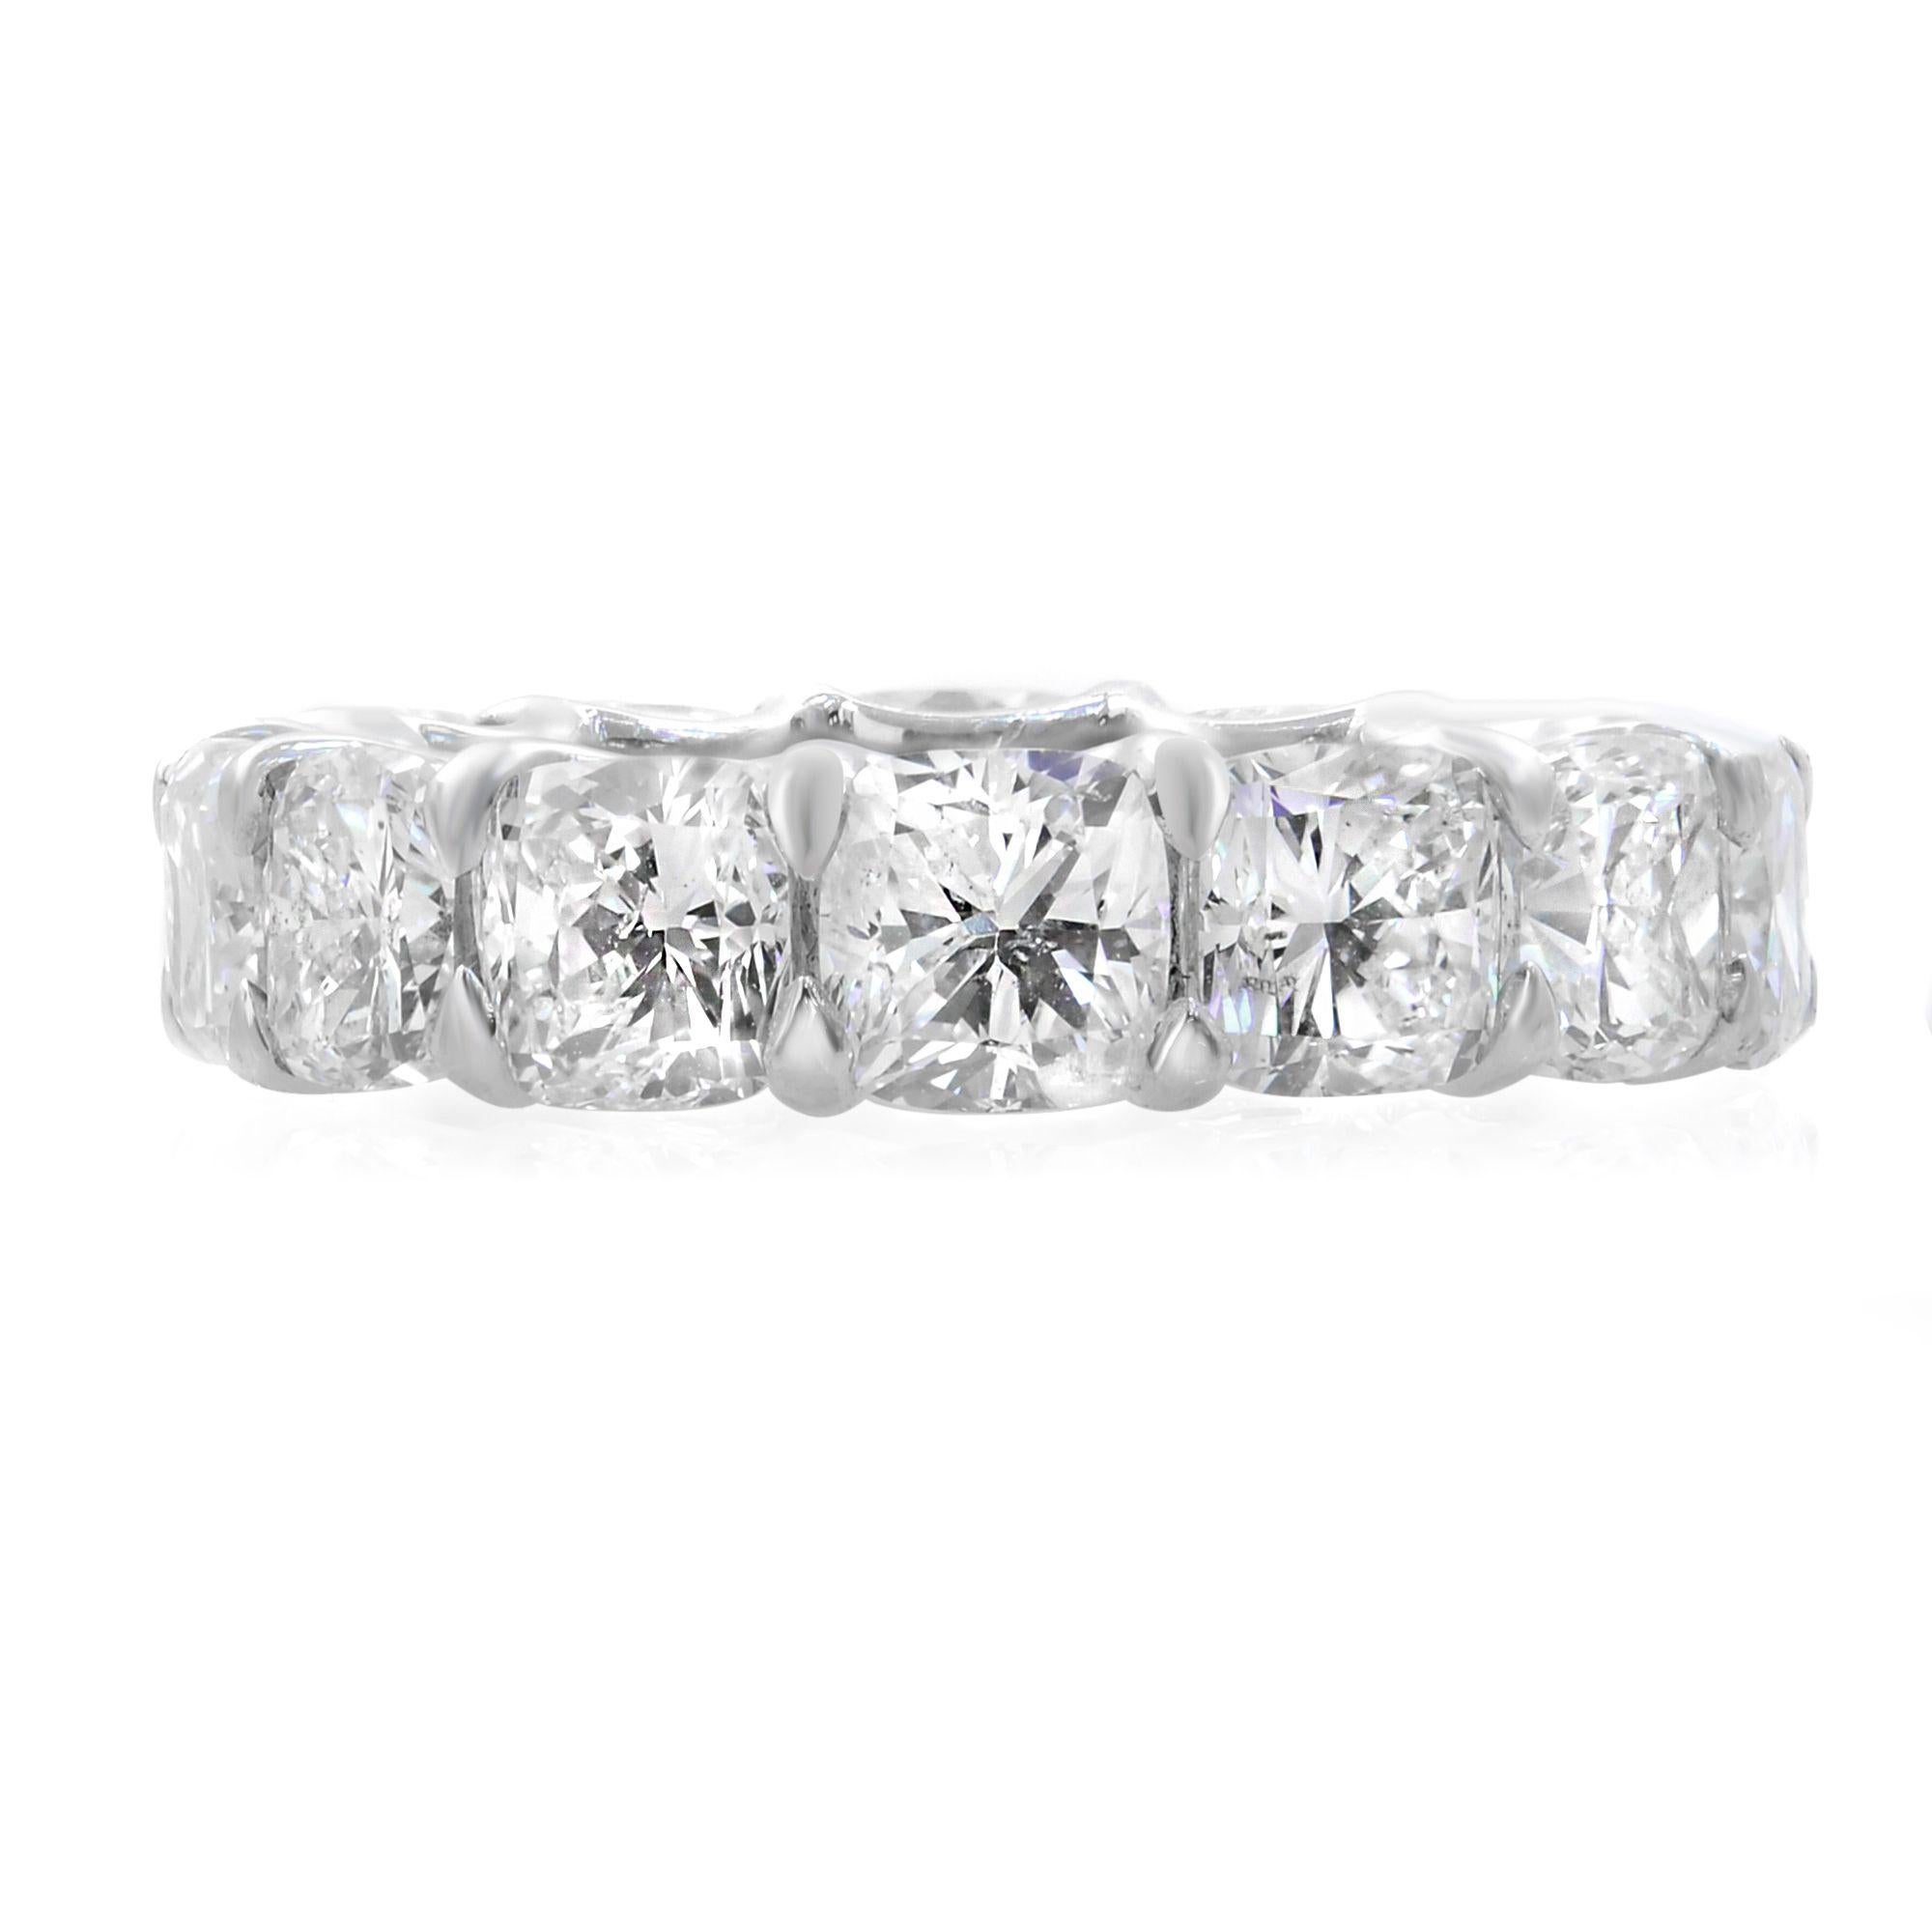 This beautiful eternity band ring is set with 14 perfectly matched cushion cut diamonds, each weighing between 0.52 carat. Each stone is F-G color and VS1 clarity. The total diamond carat weight is 8.34. This band is crafted in platinum. Ring size